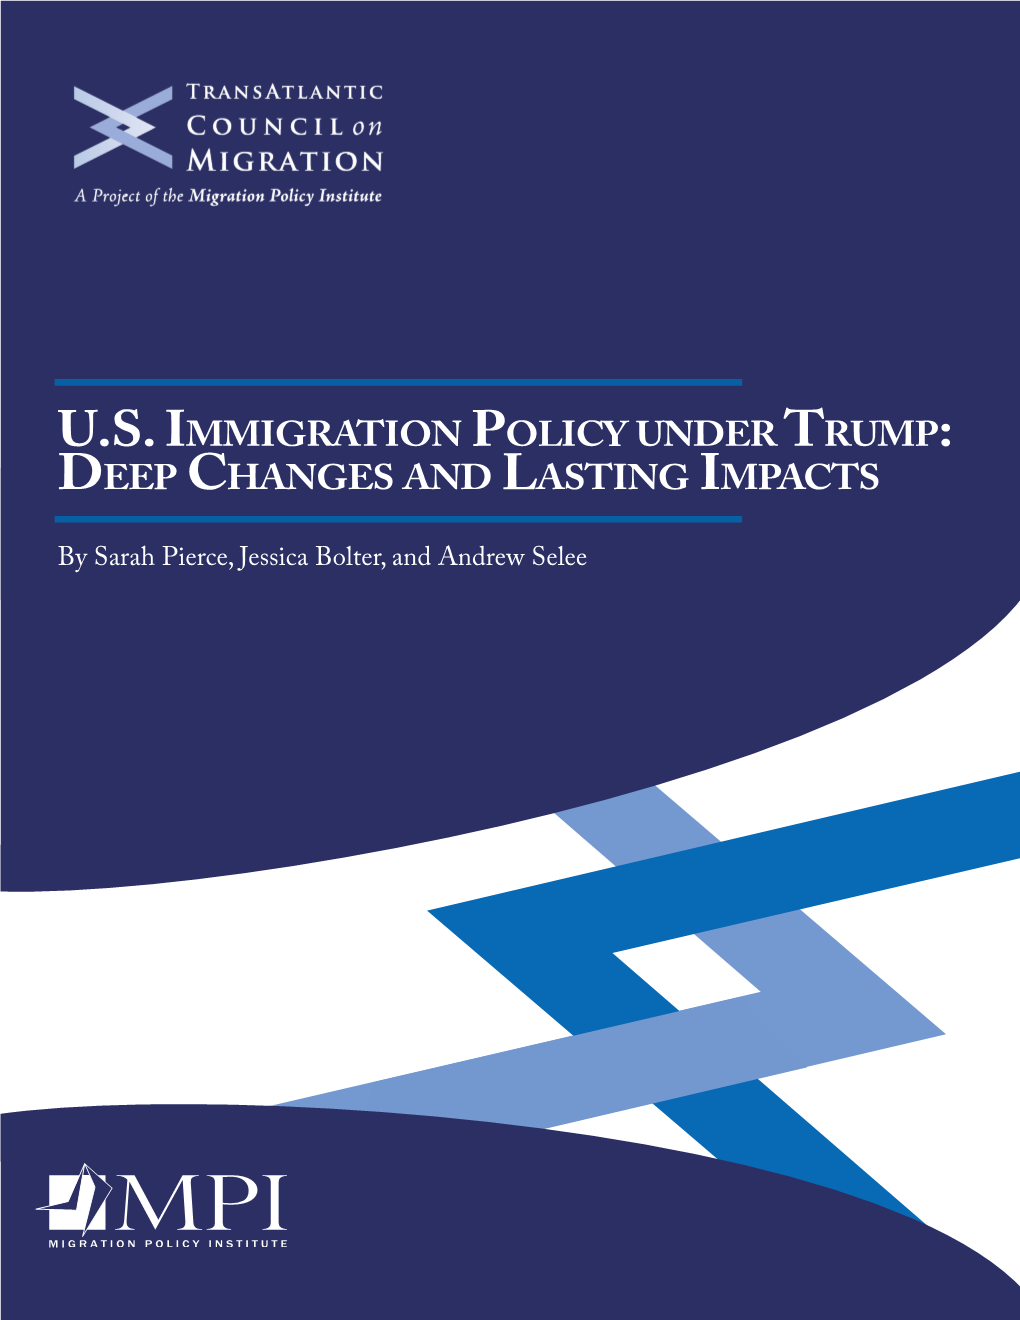 U.S. Immigration Policy Under Trump: Deep Changes and Lasting Impacts